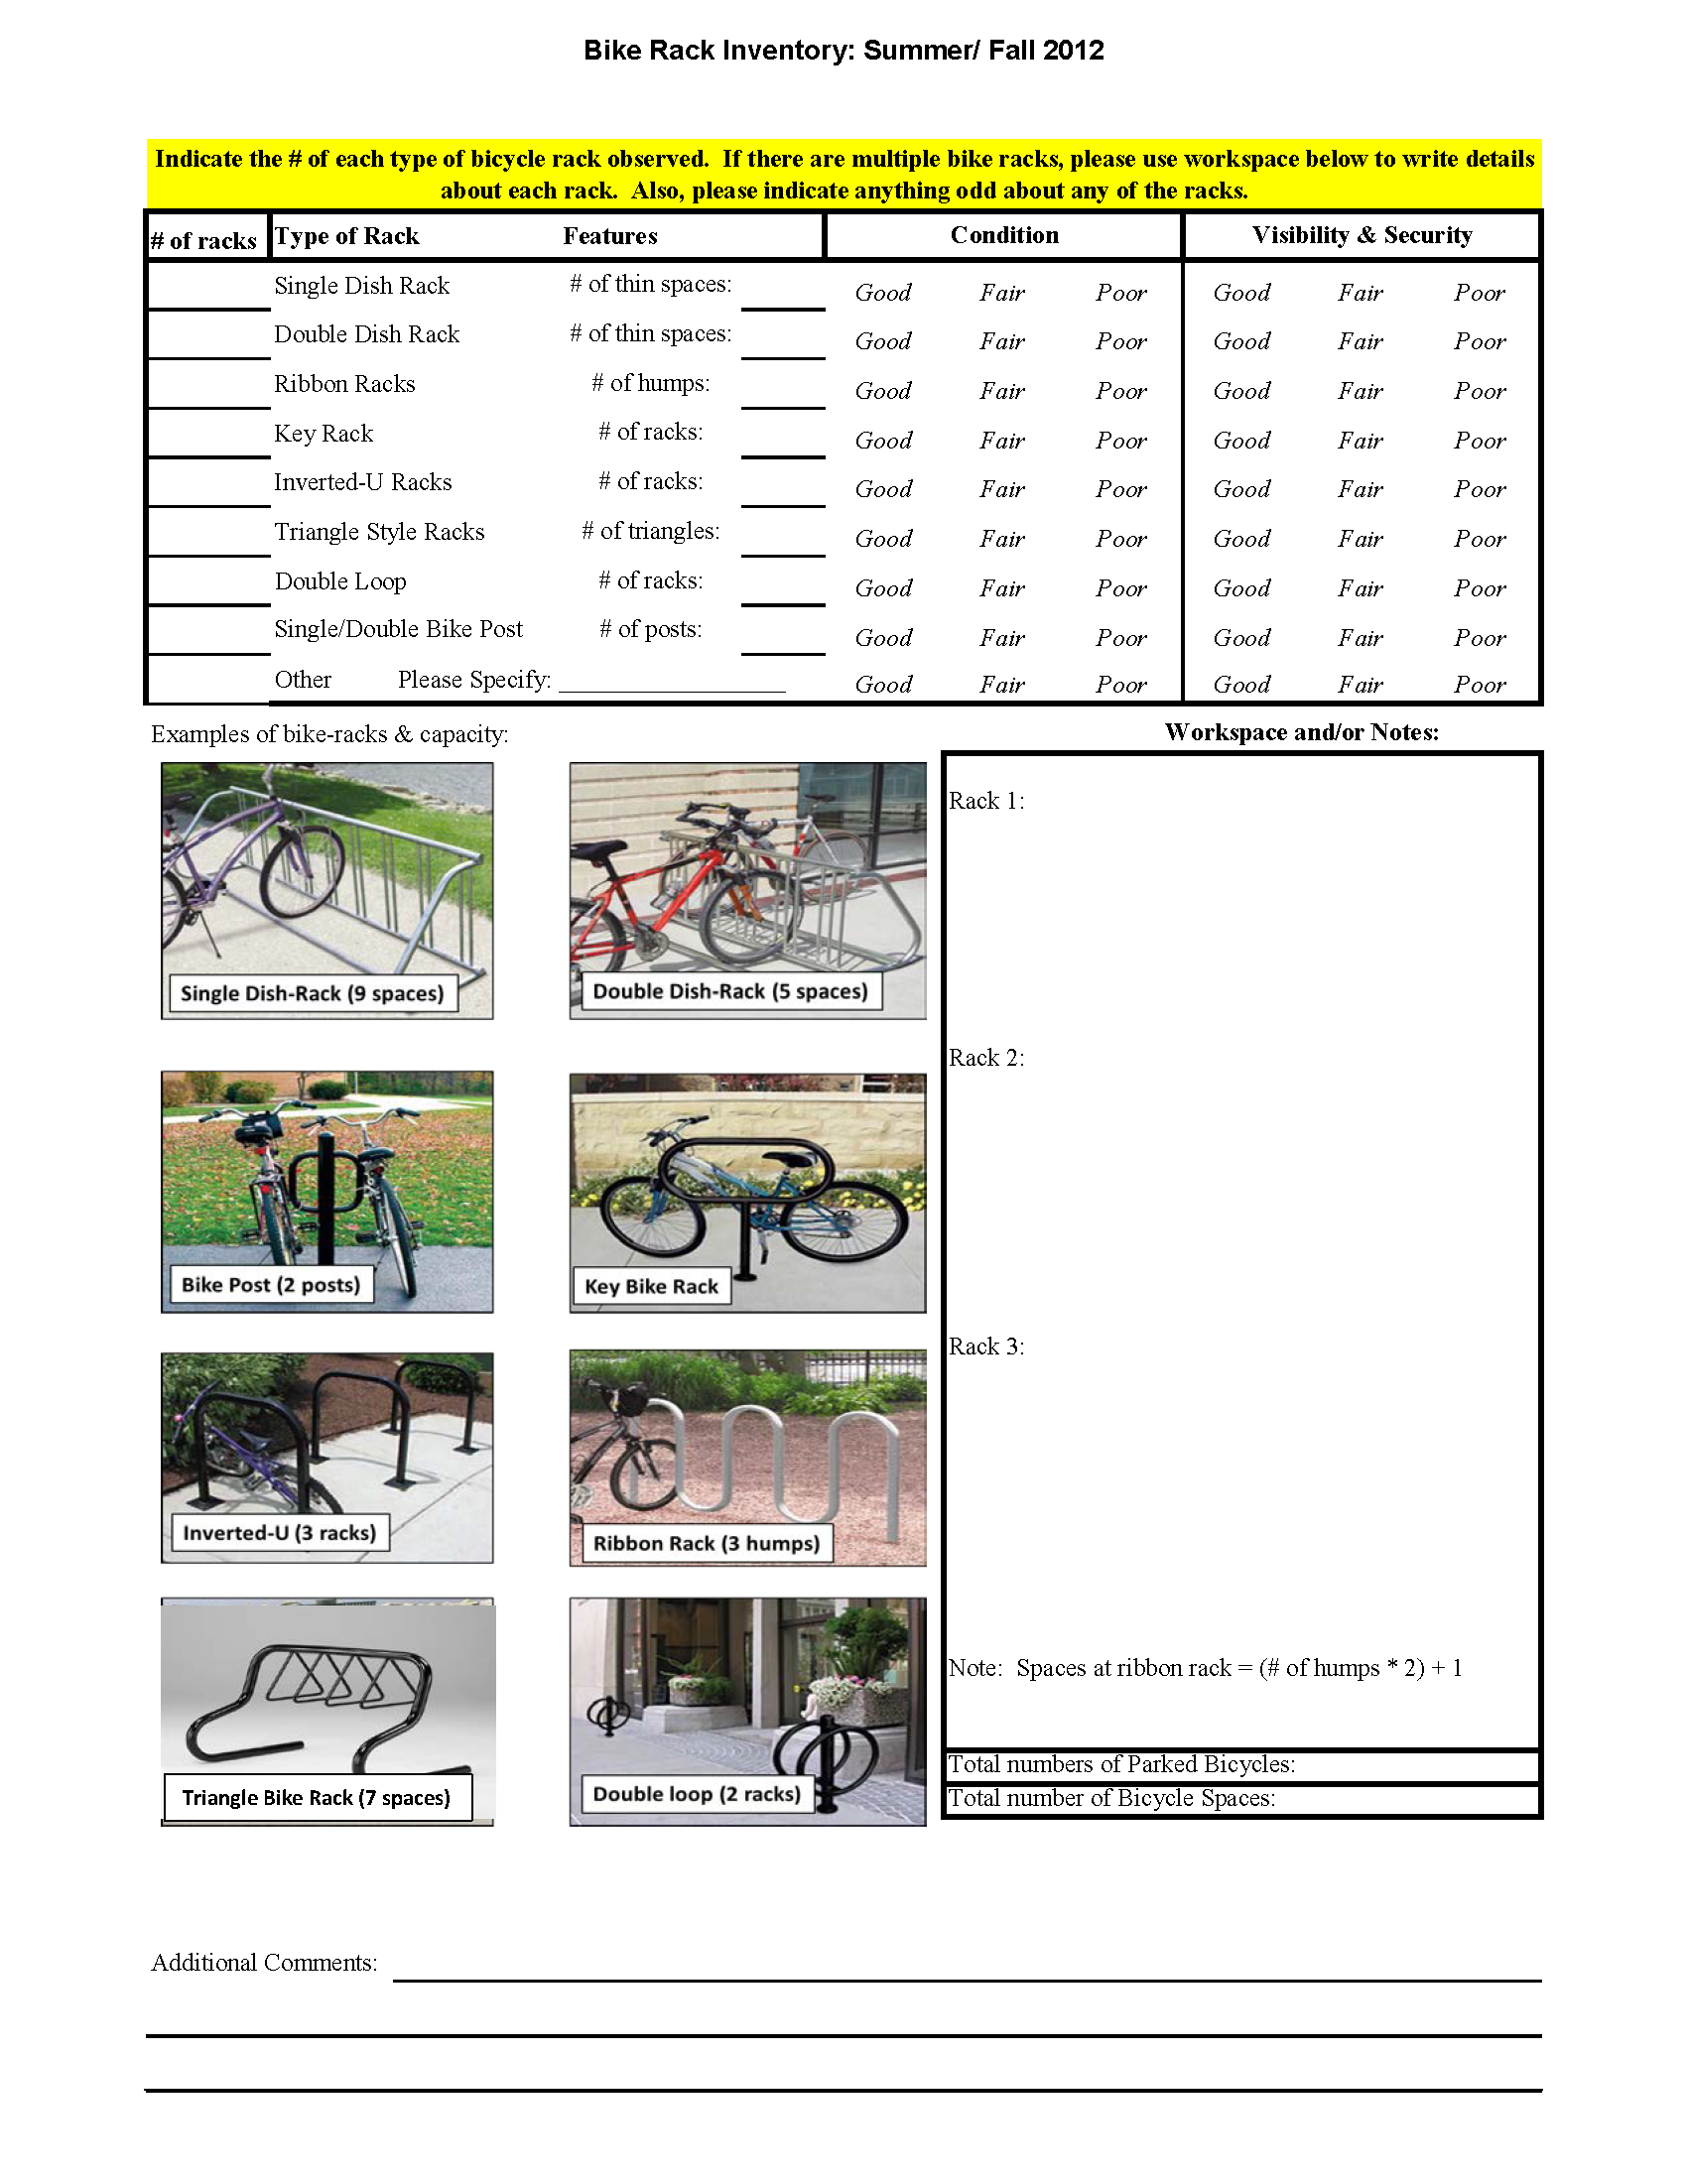 An image of the Bike Rack Inventory survey form. Page 2 of 2.